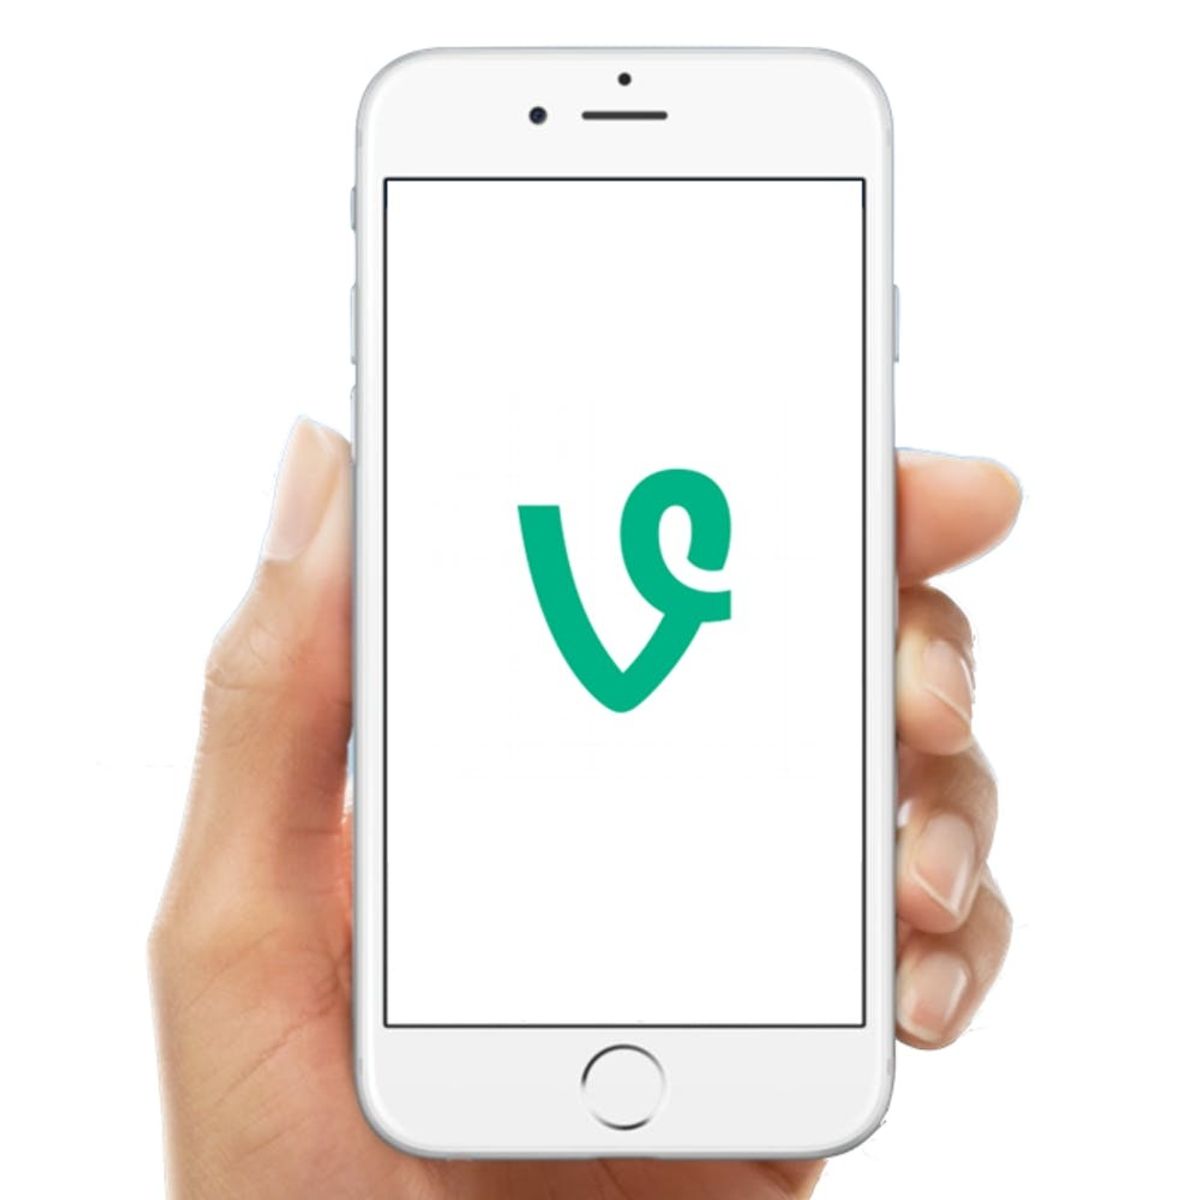 RIP Vine: Here’s What You Need to Know